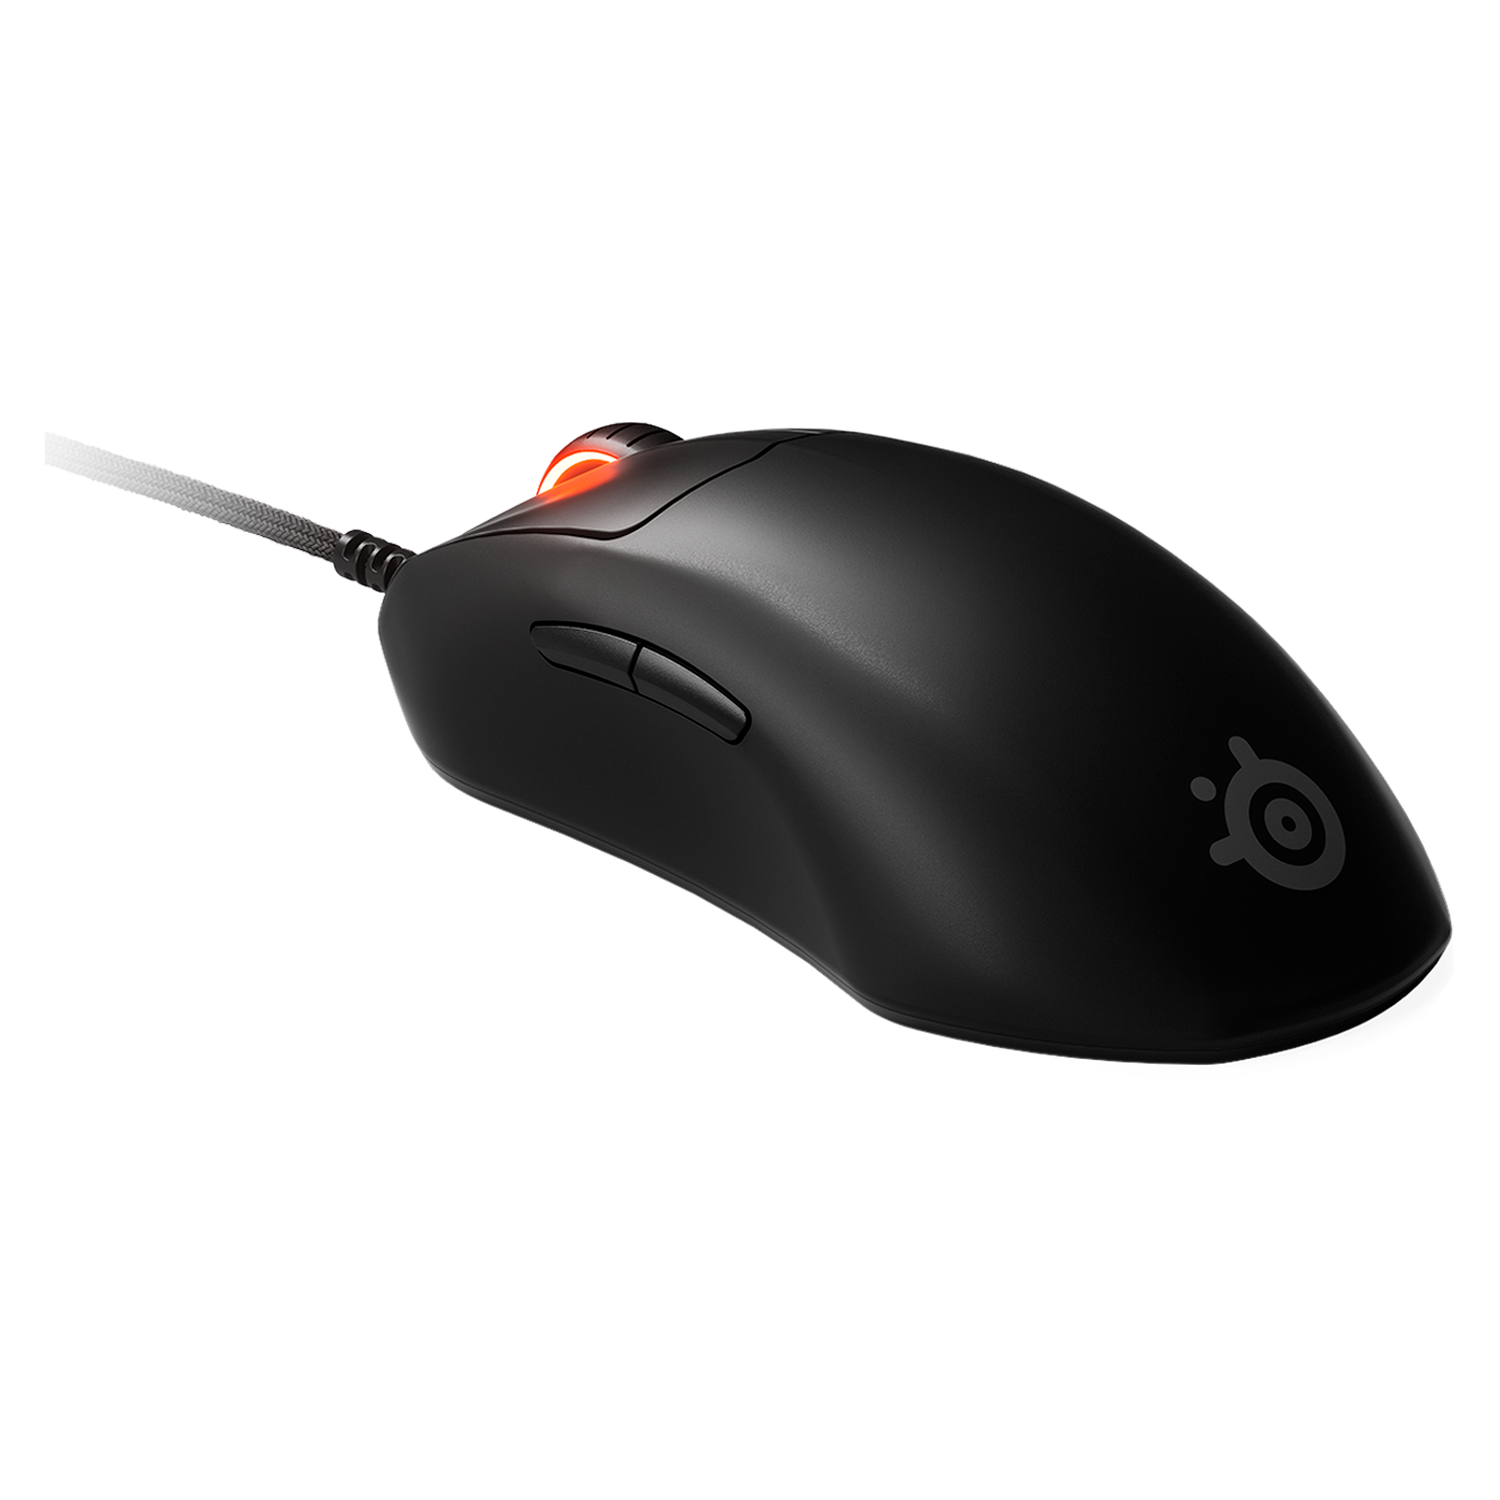 Mouse Steelseries Prime+ (62490)